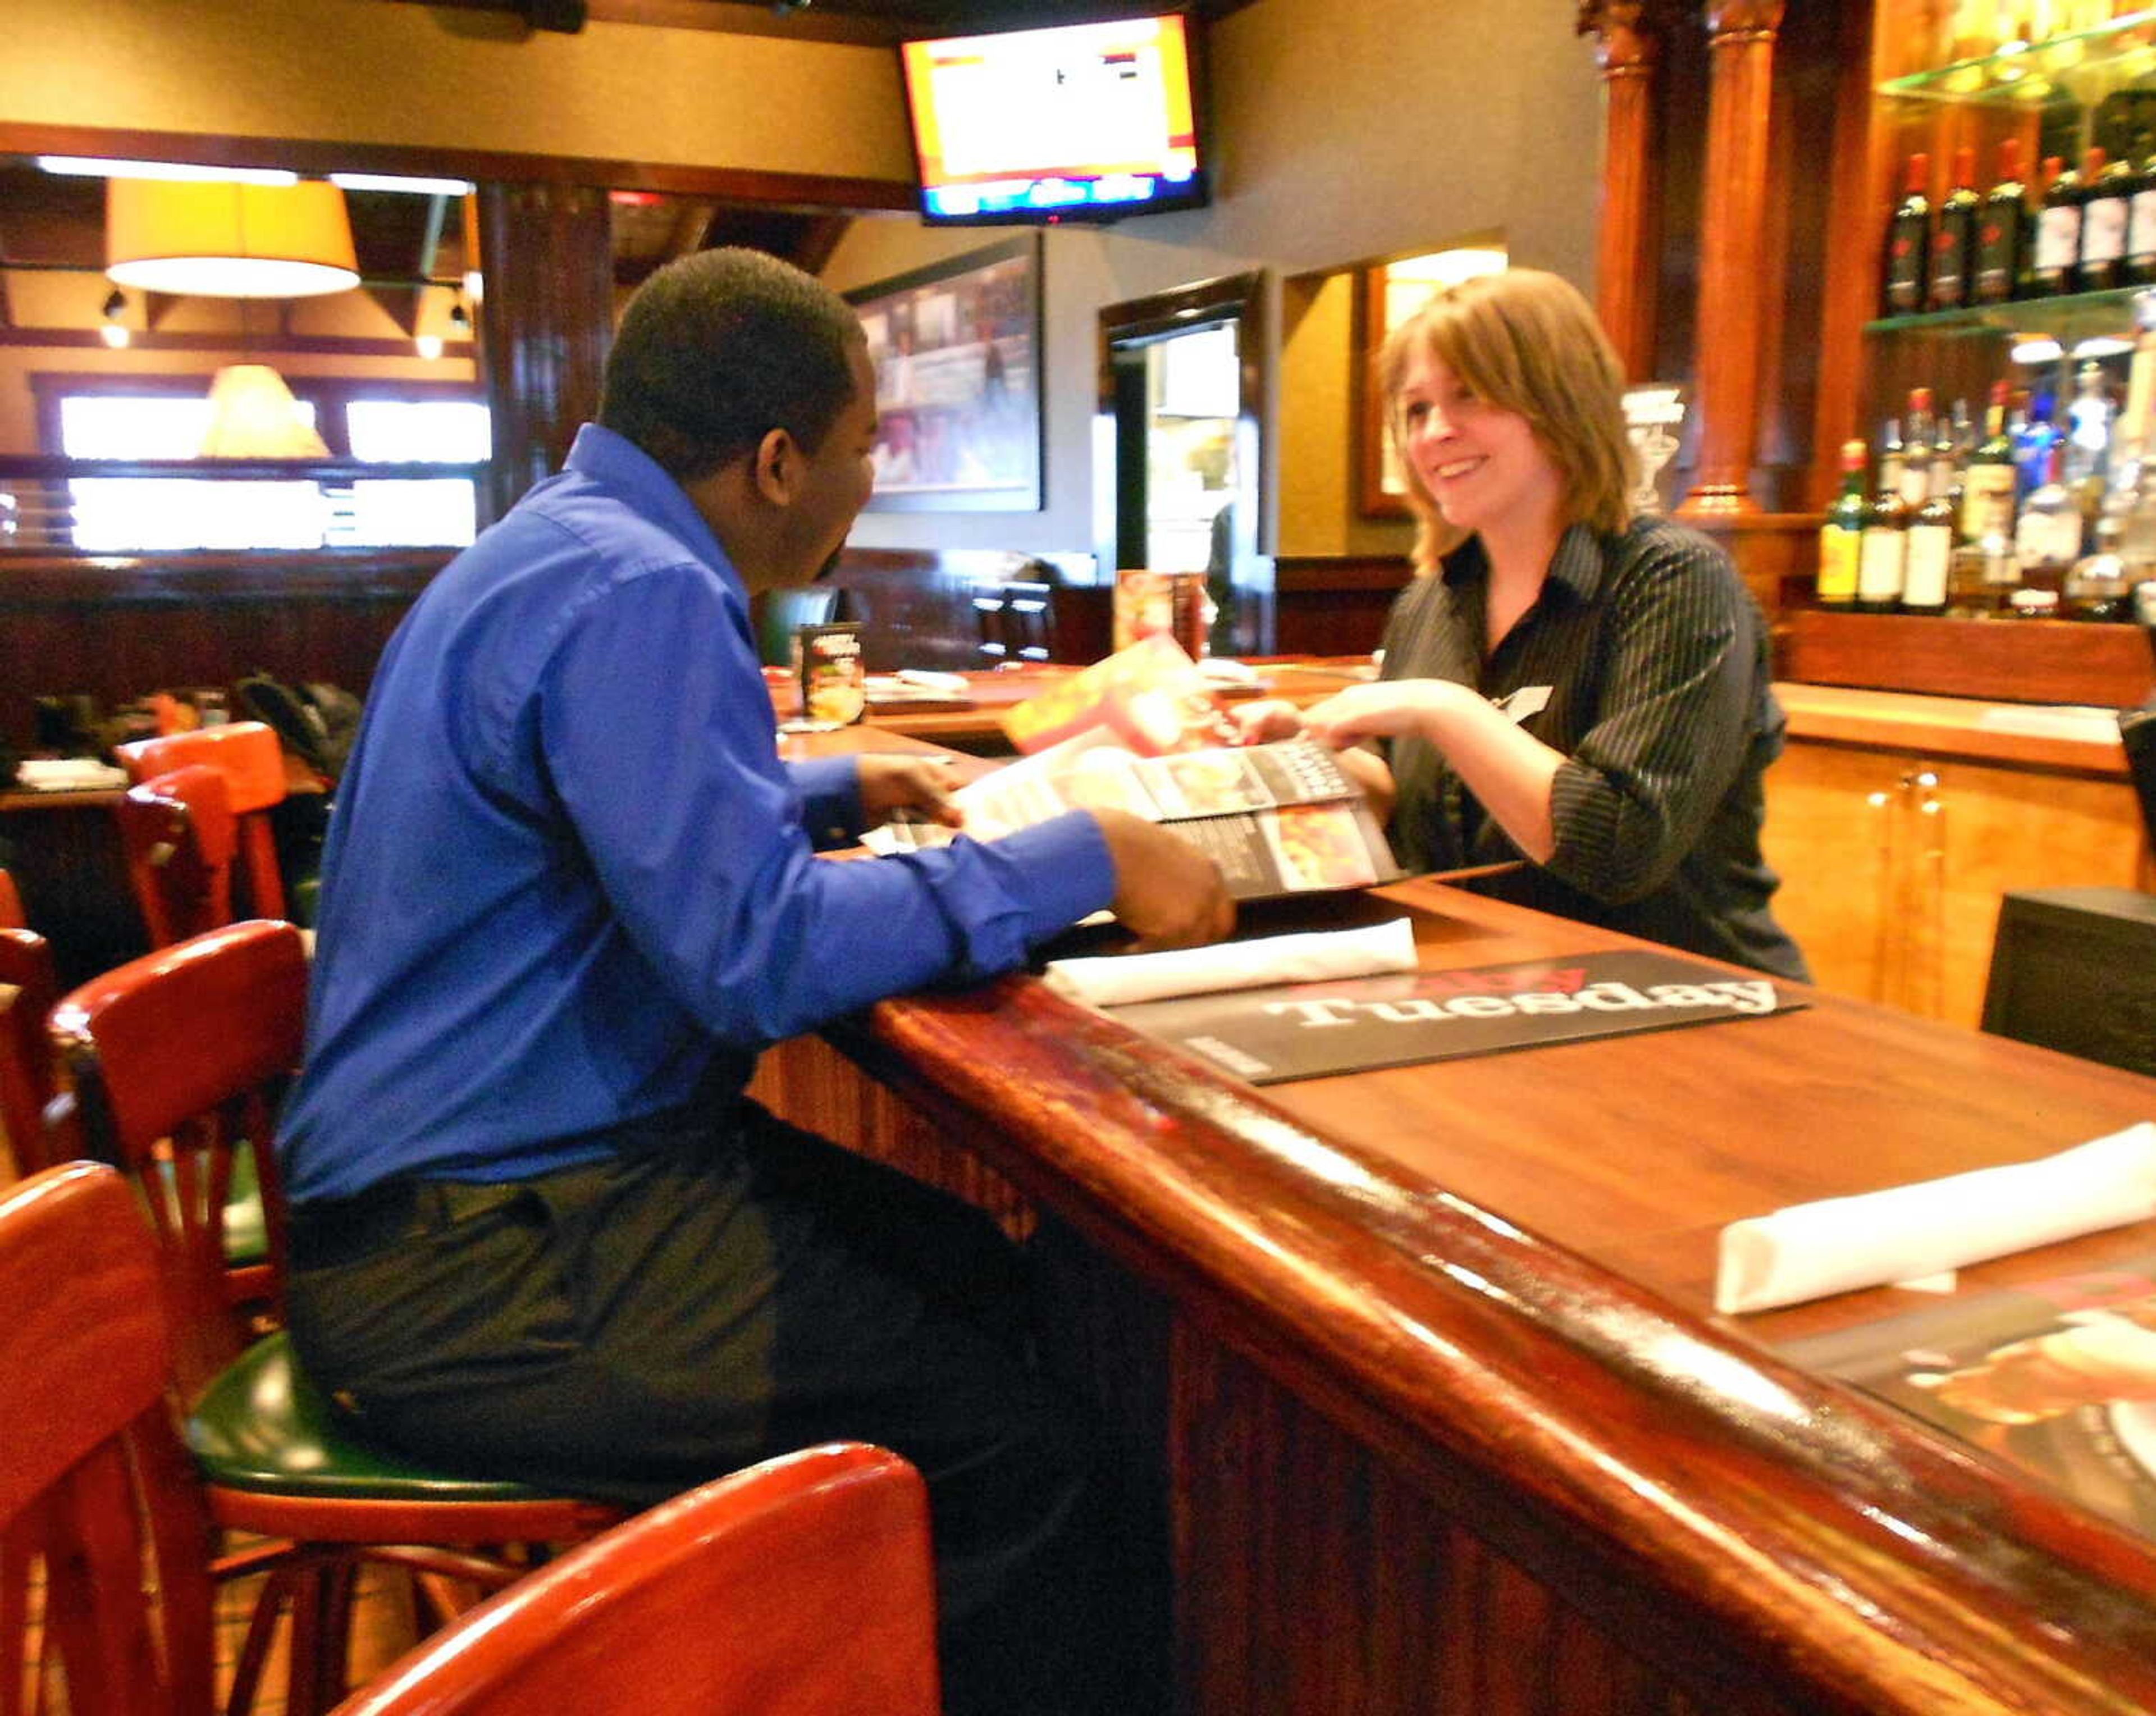 Shawna Shweain greeting a guest and suggesting menu items during her serving shift at Ruby Tuesdays. Photo by Hannah Parent